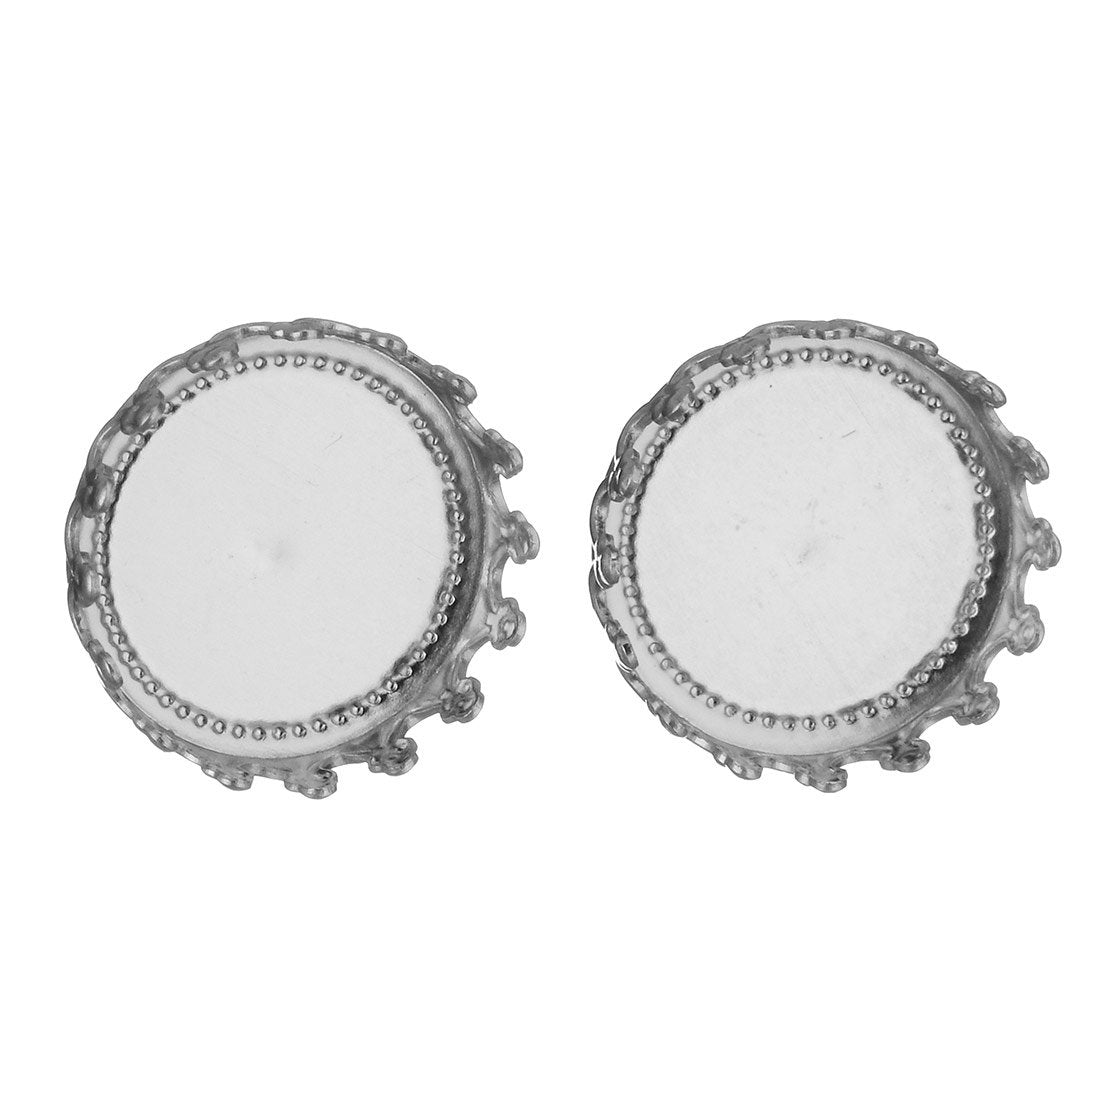 Stainless steel ear stud crown cabochon settings - fits 12mm cabochons